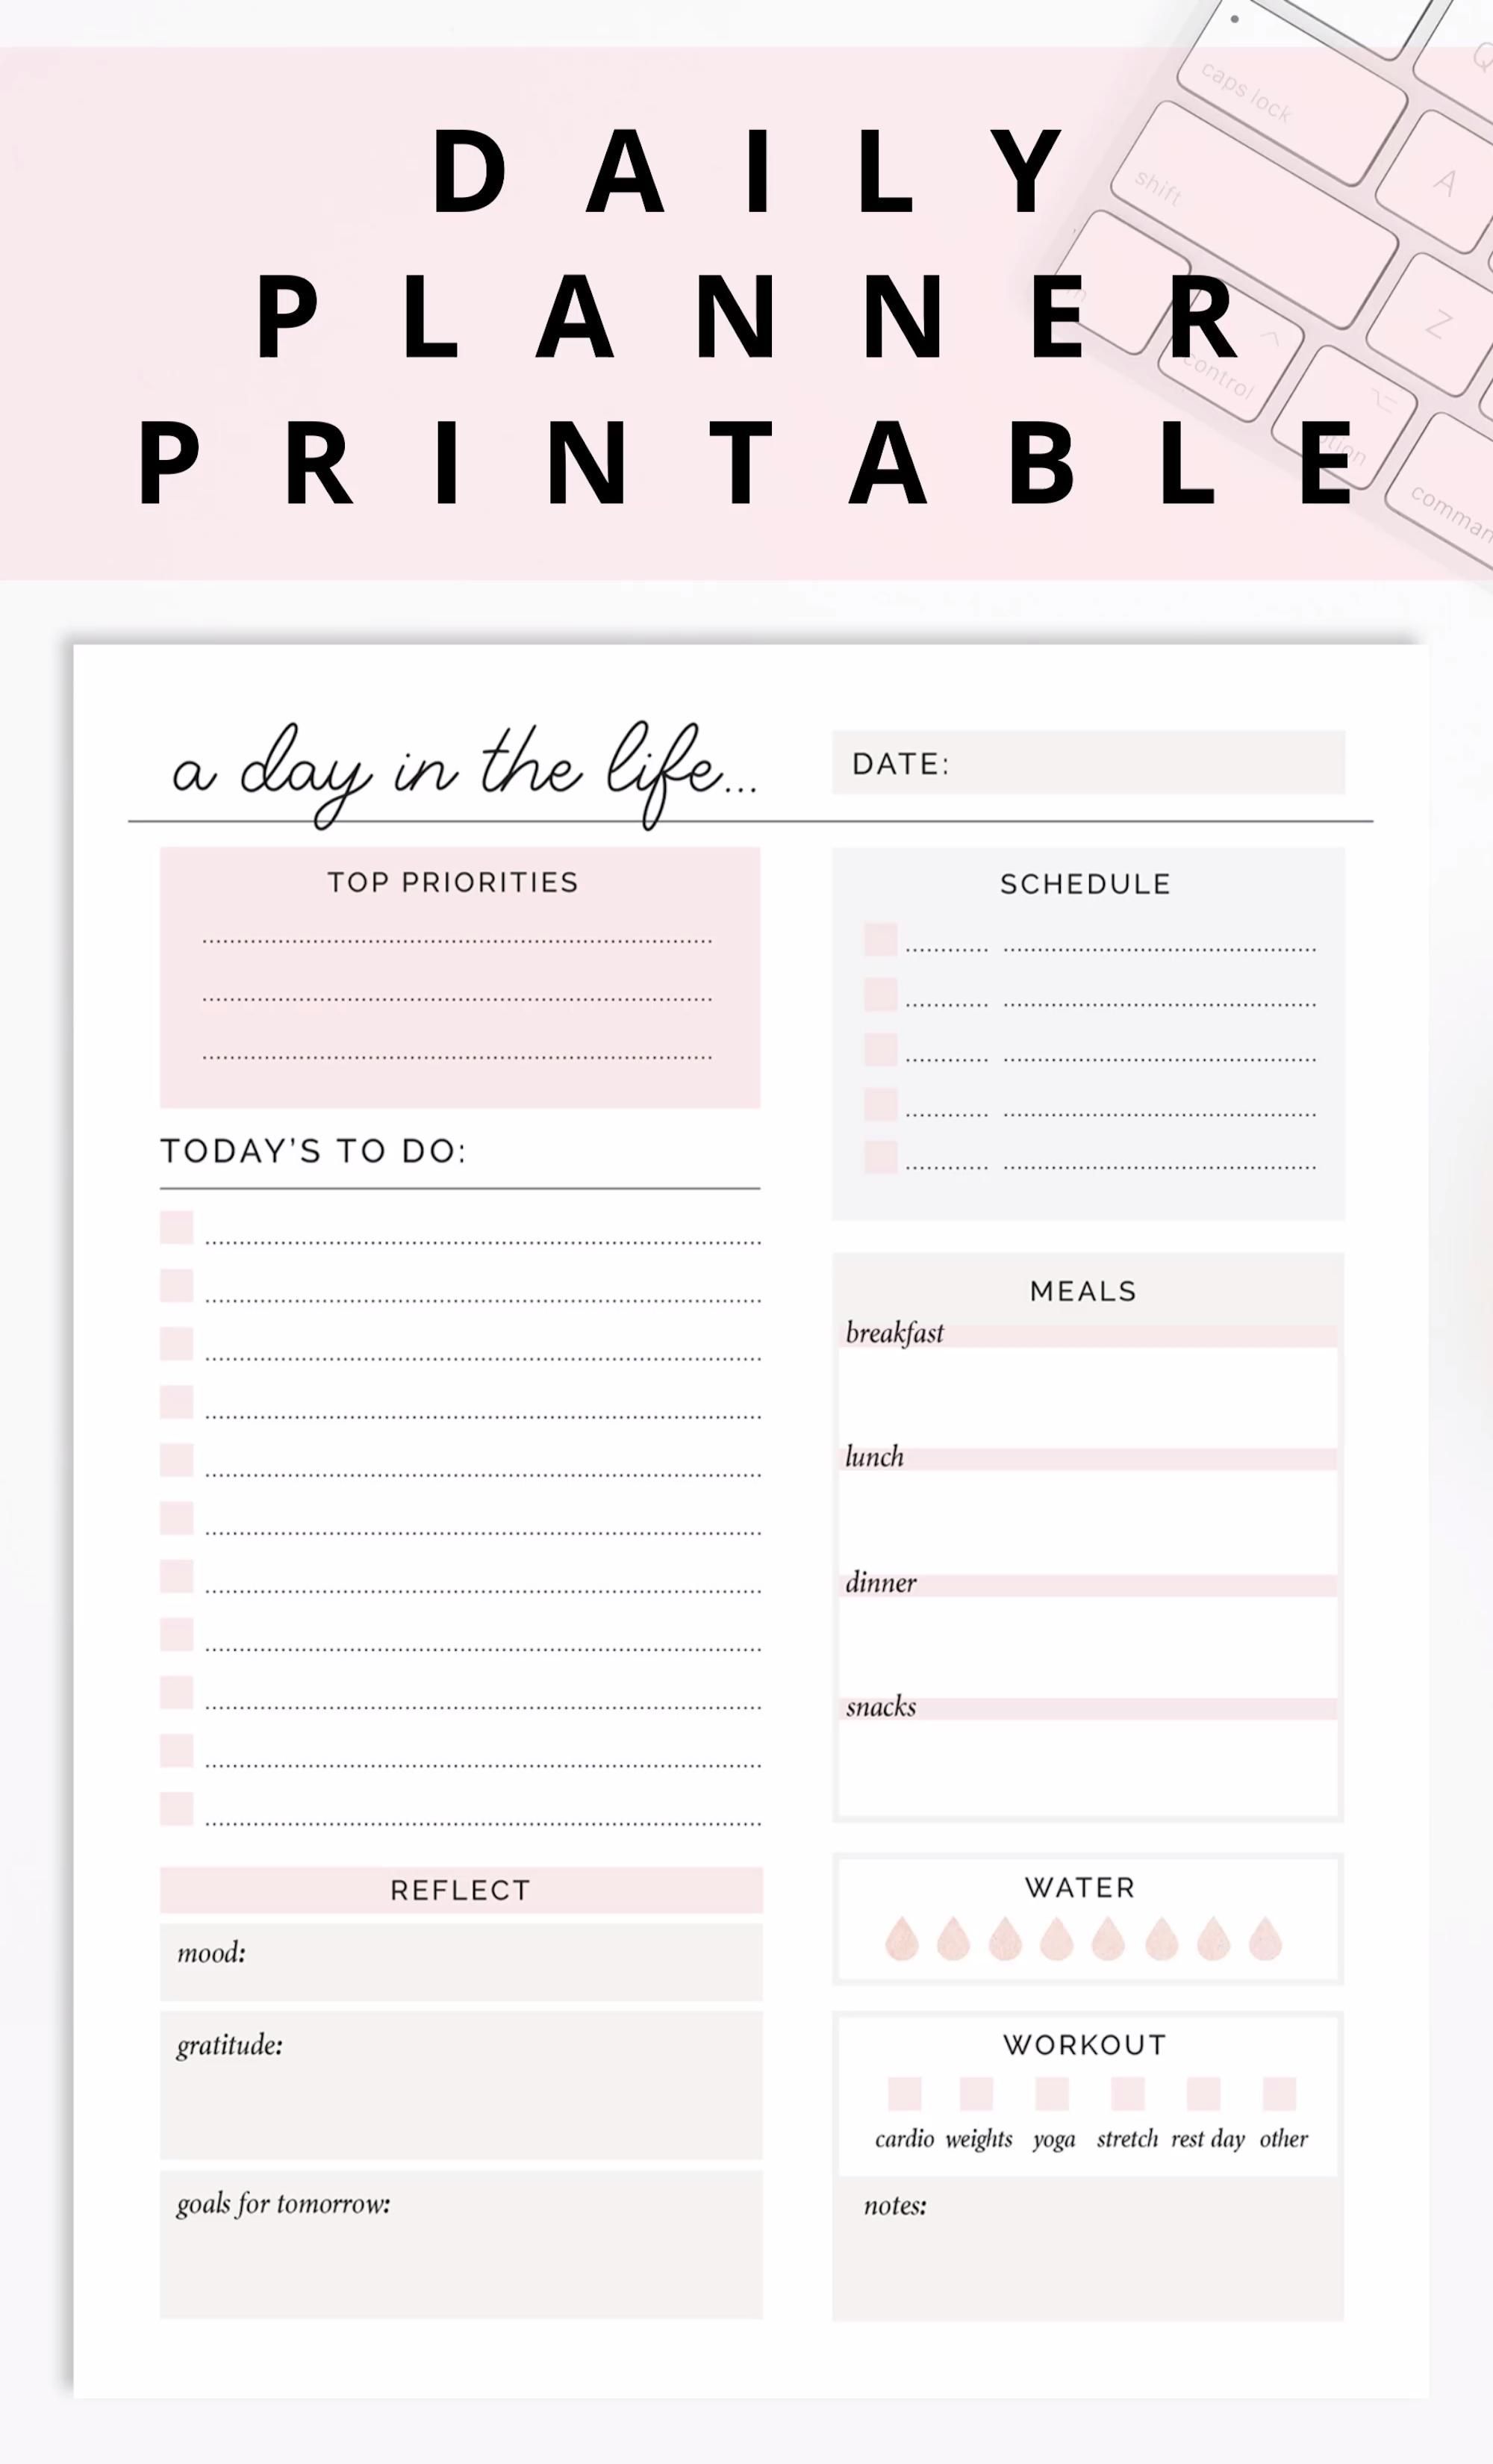 Daily Planner Printable/ Editable Daily To Do list Planner Page, Meal Planner, Fitness Goals Tracker -   fitness Planner pages